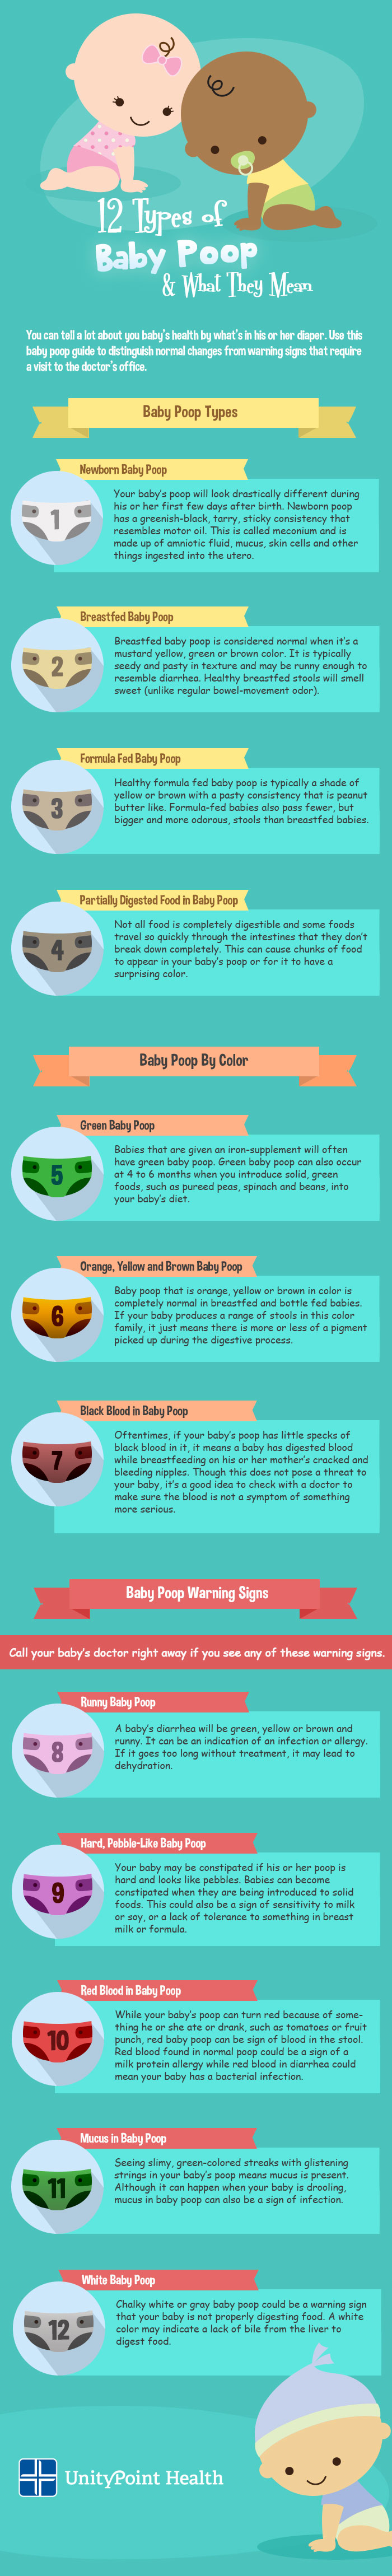 Types of poop: Appearance, color, and what is normal